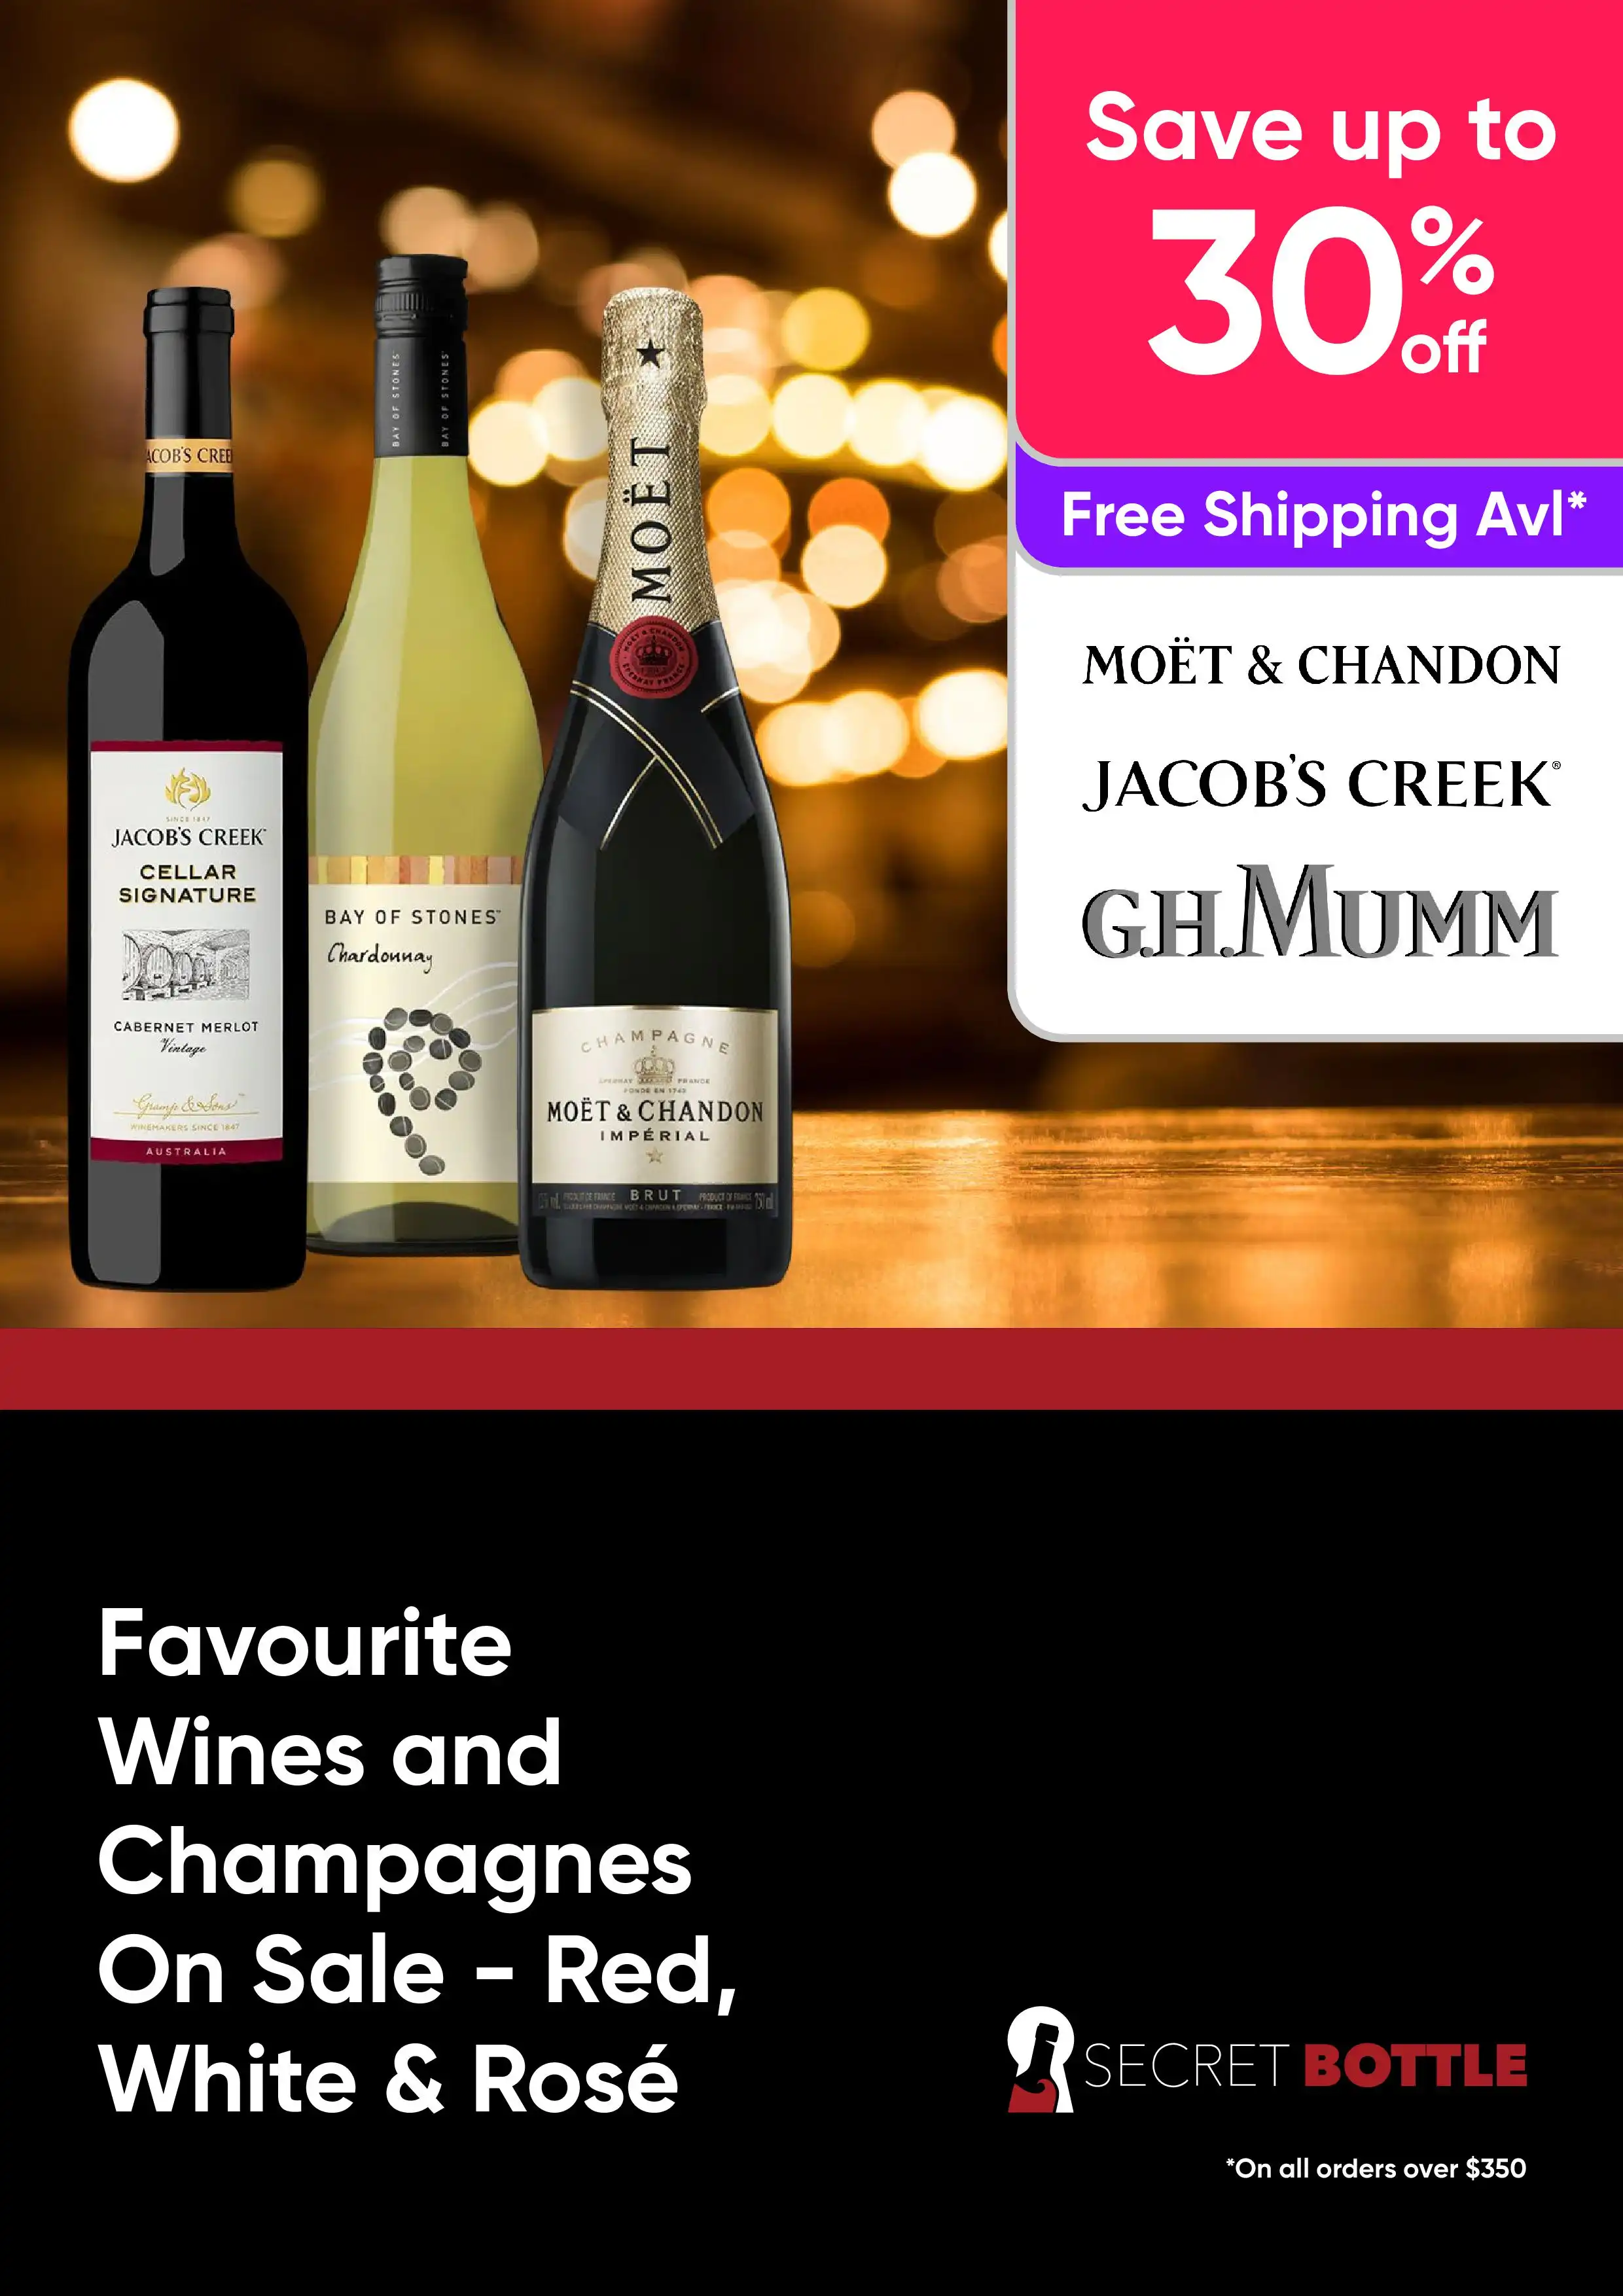 Favourite Wines and Champagnes On Sale - Red, Whites and Rose Bottles up to 30% Off